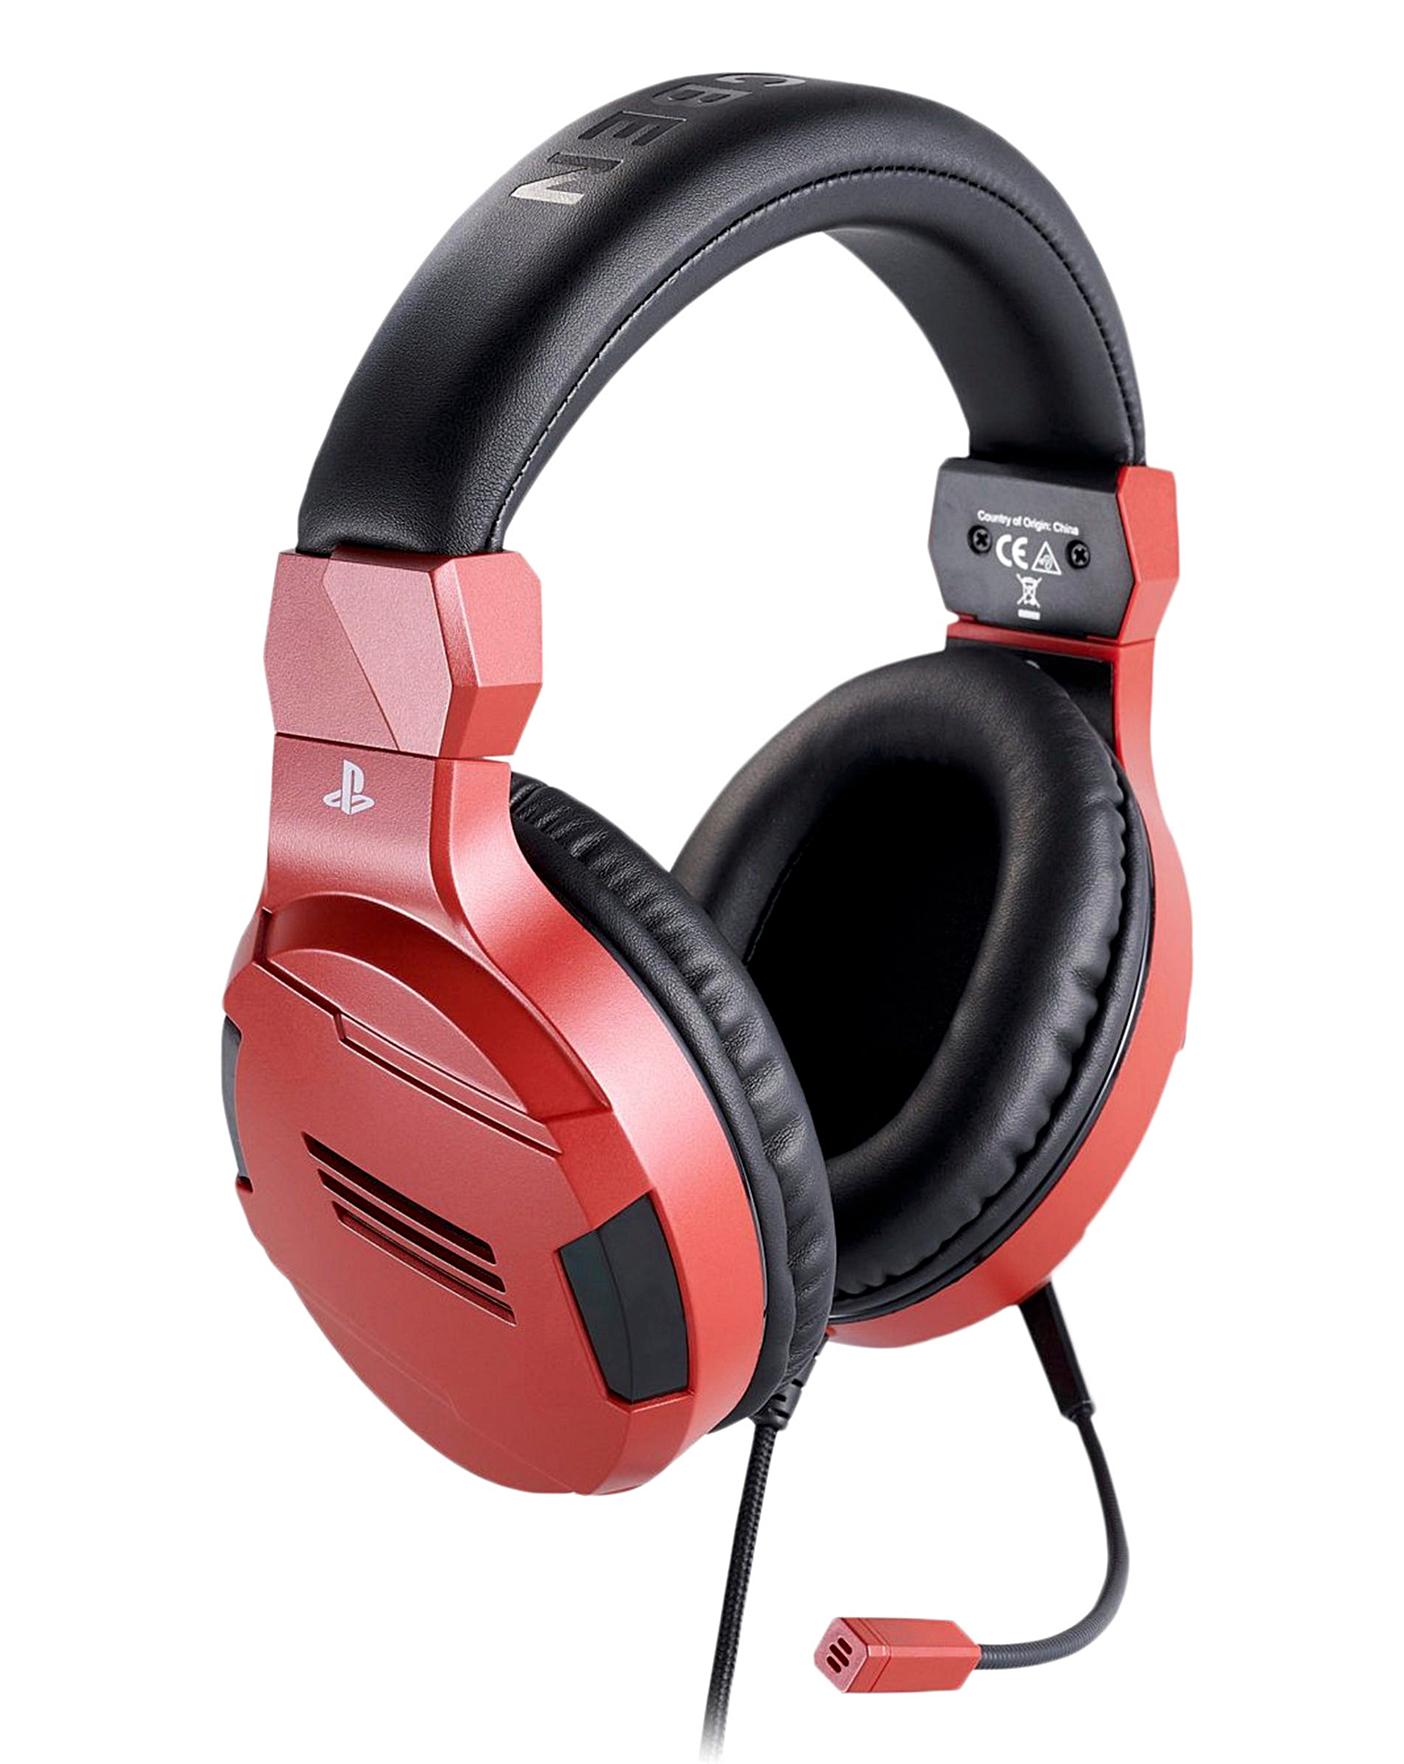 ps4 headset red